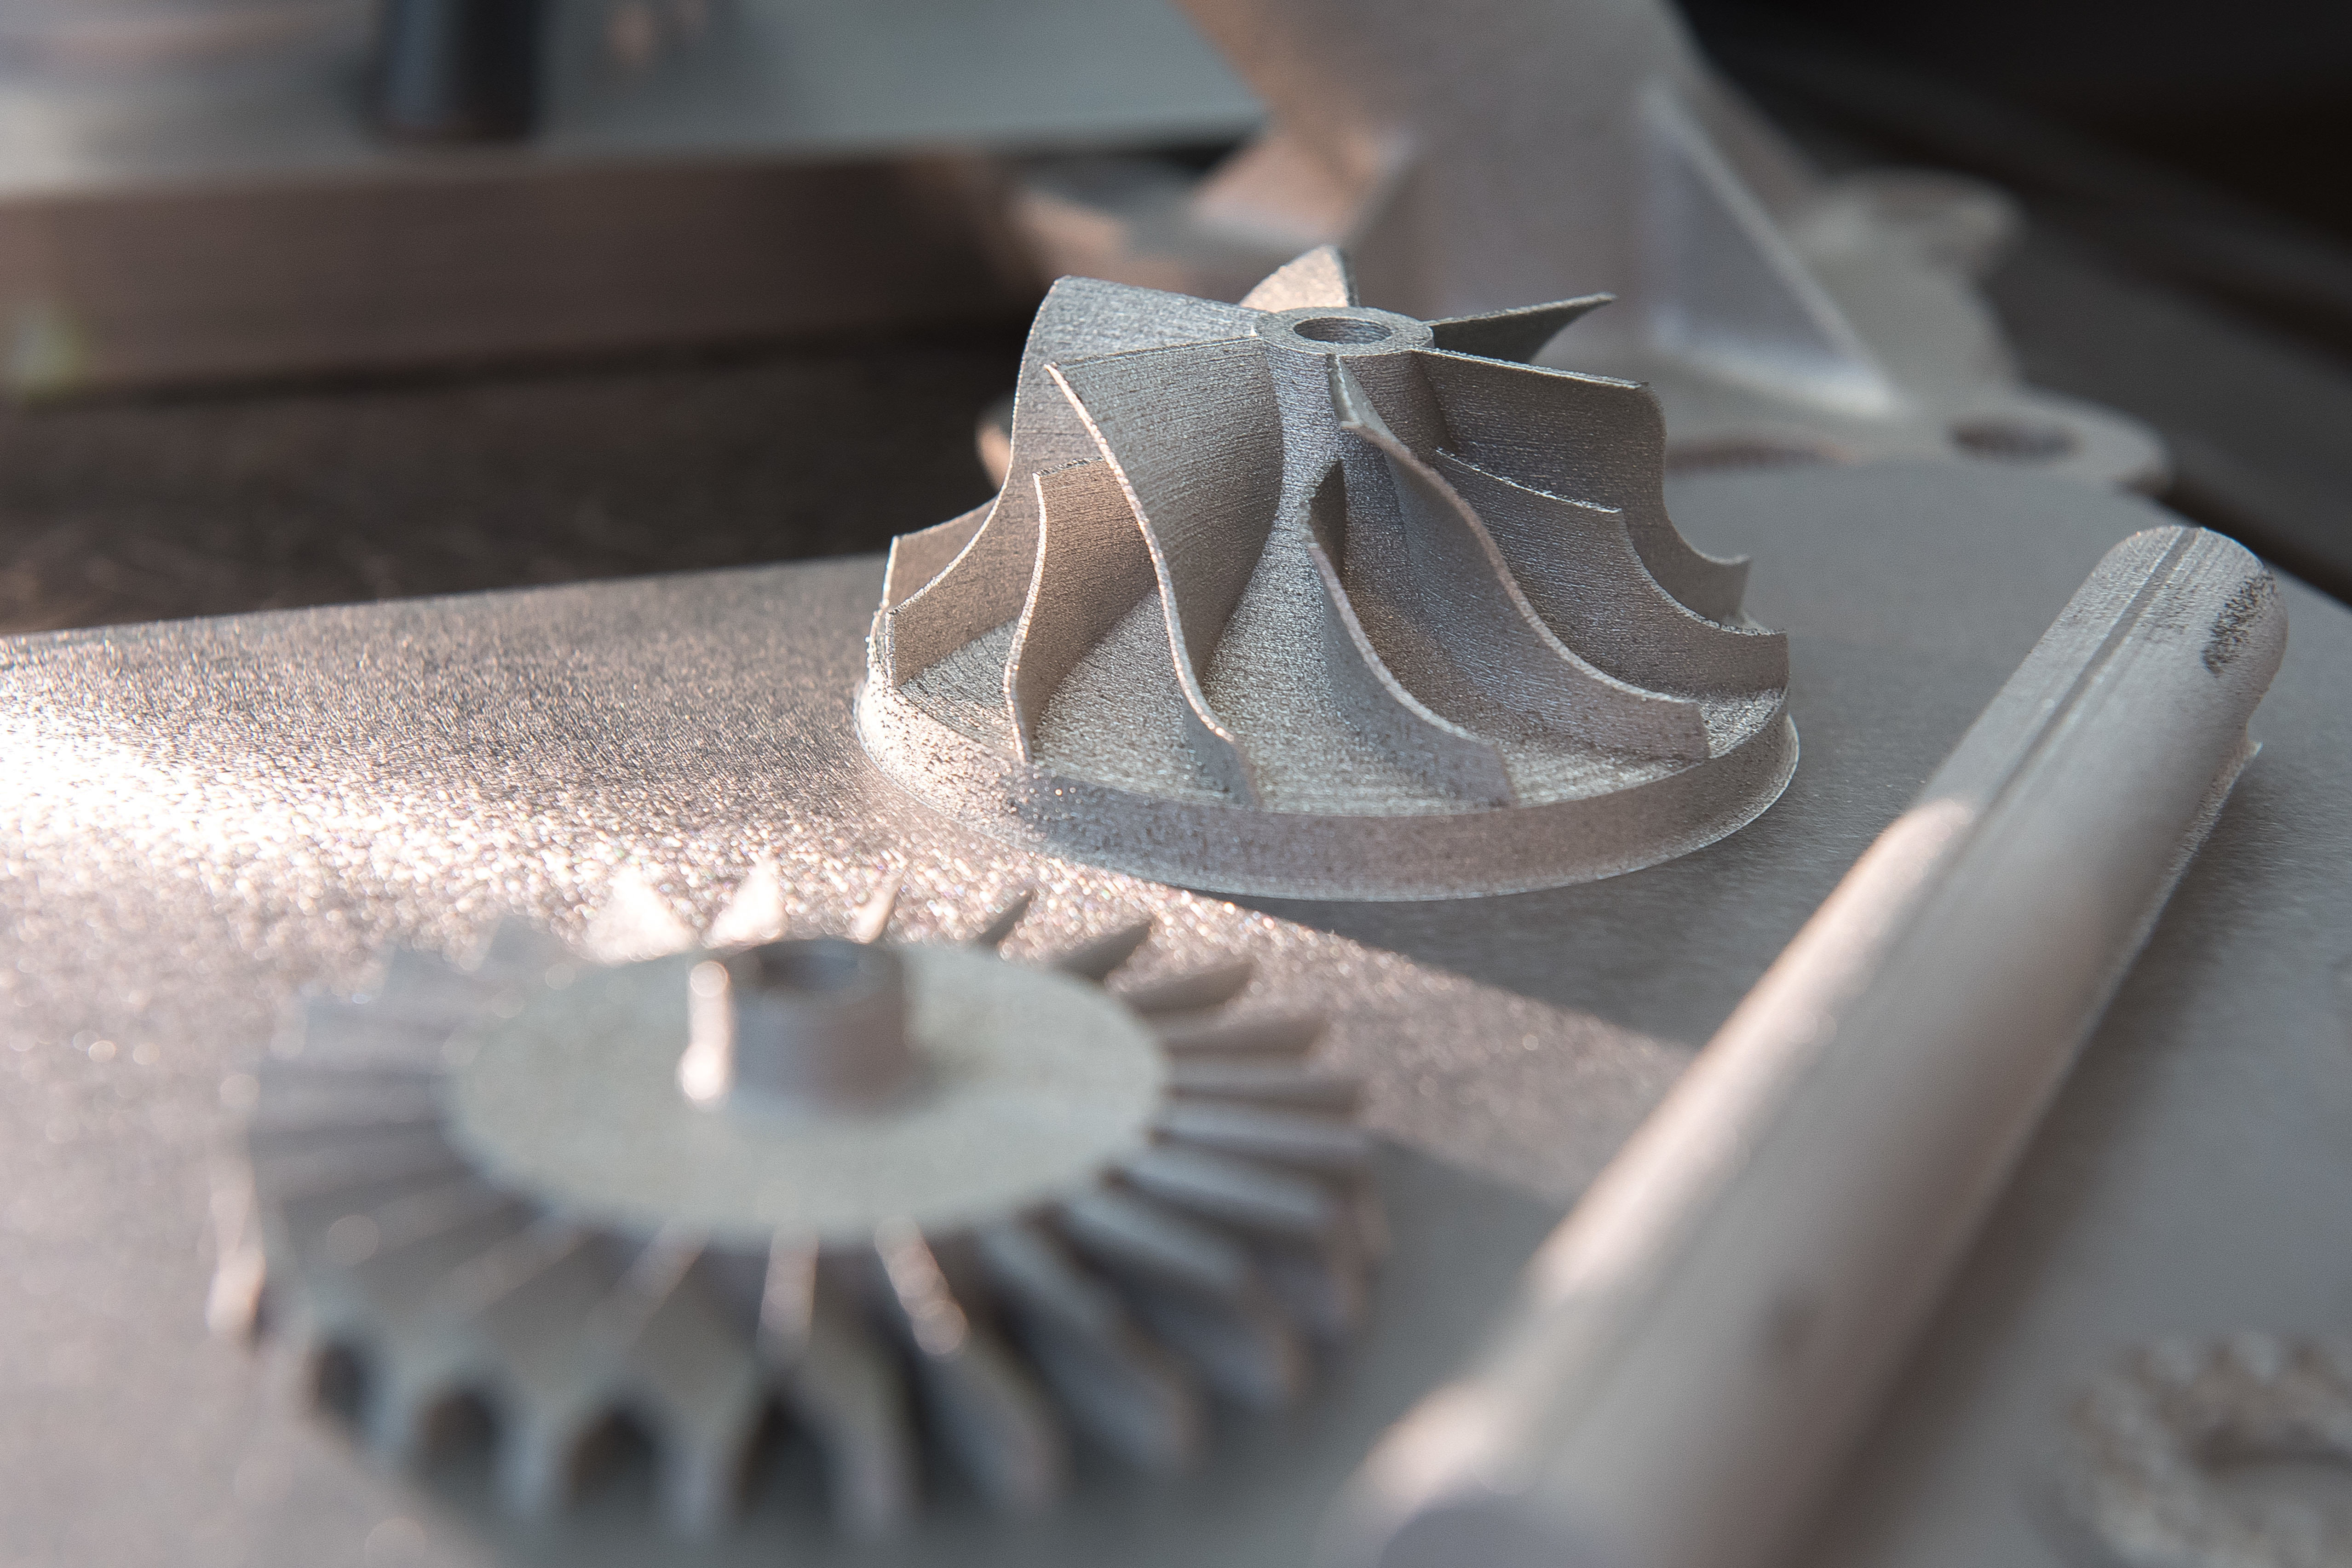 Large-scale 3D printers for additive manufacturing: design considerations  and challenges